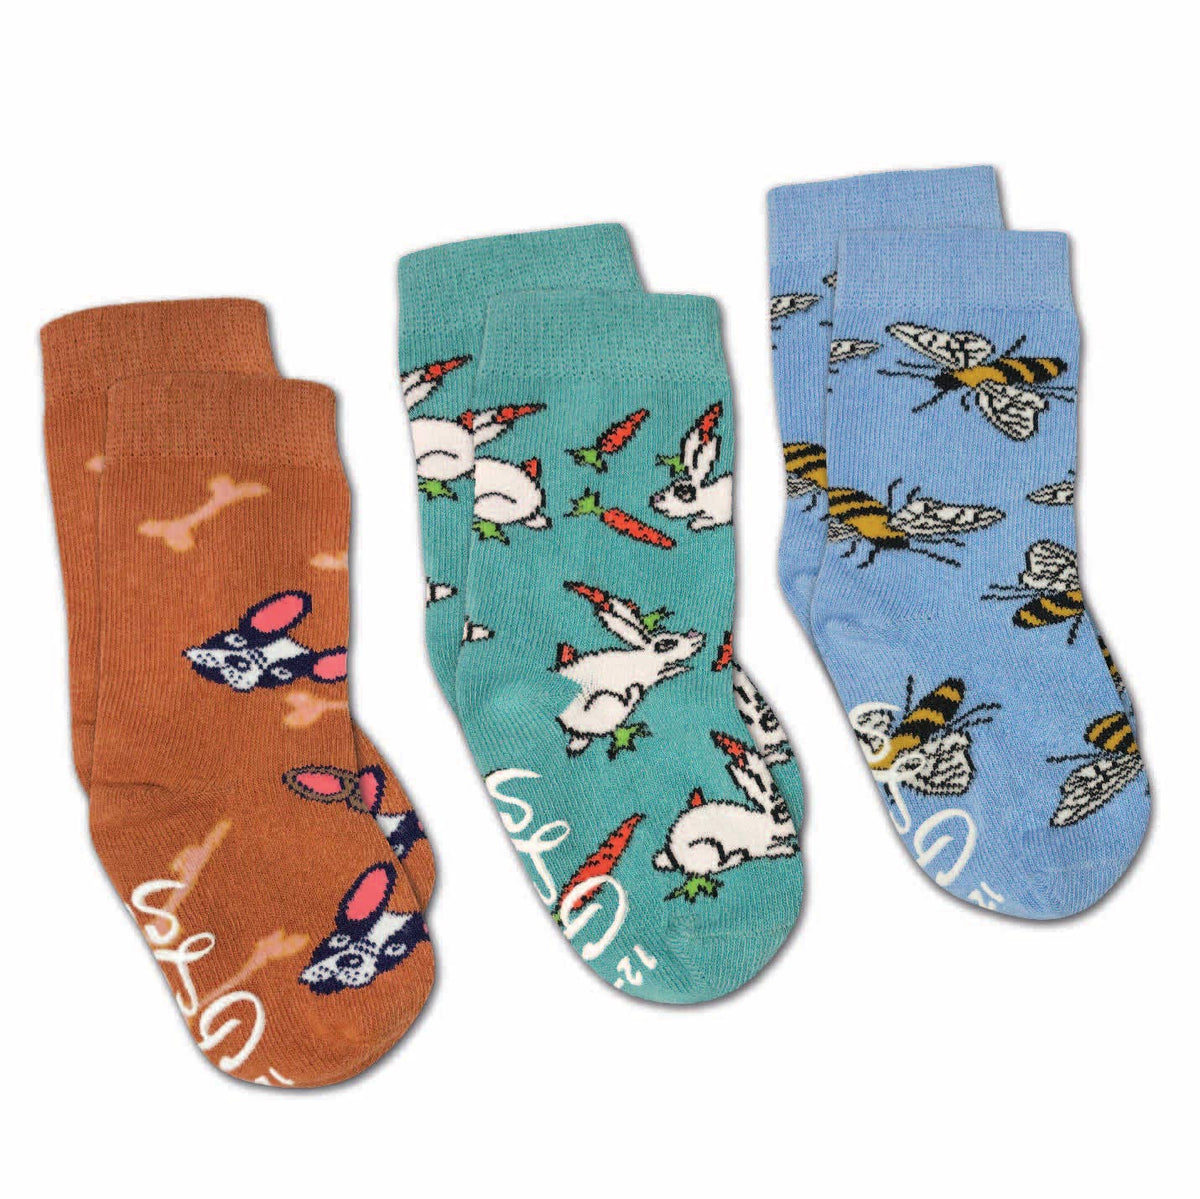 Copy of Good Luck Socks Bees, Bunnies And Dogs Kids Socks / 3-Pack